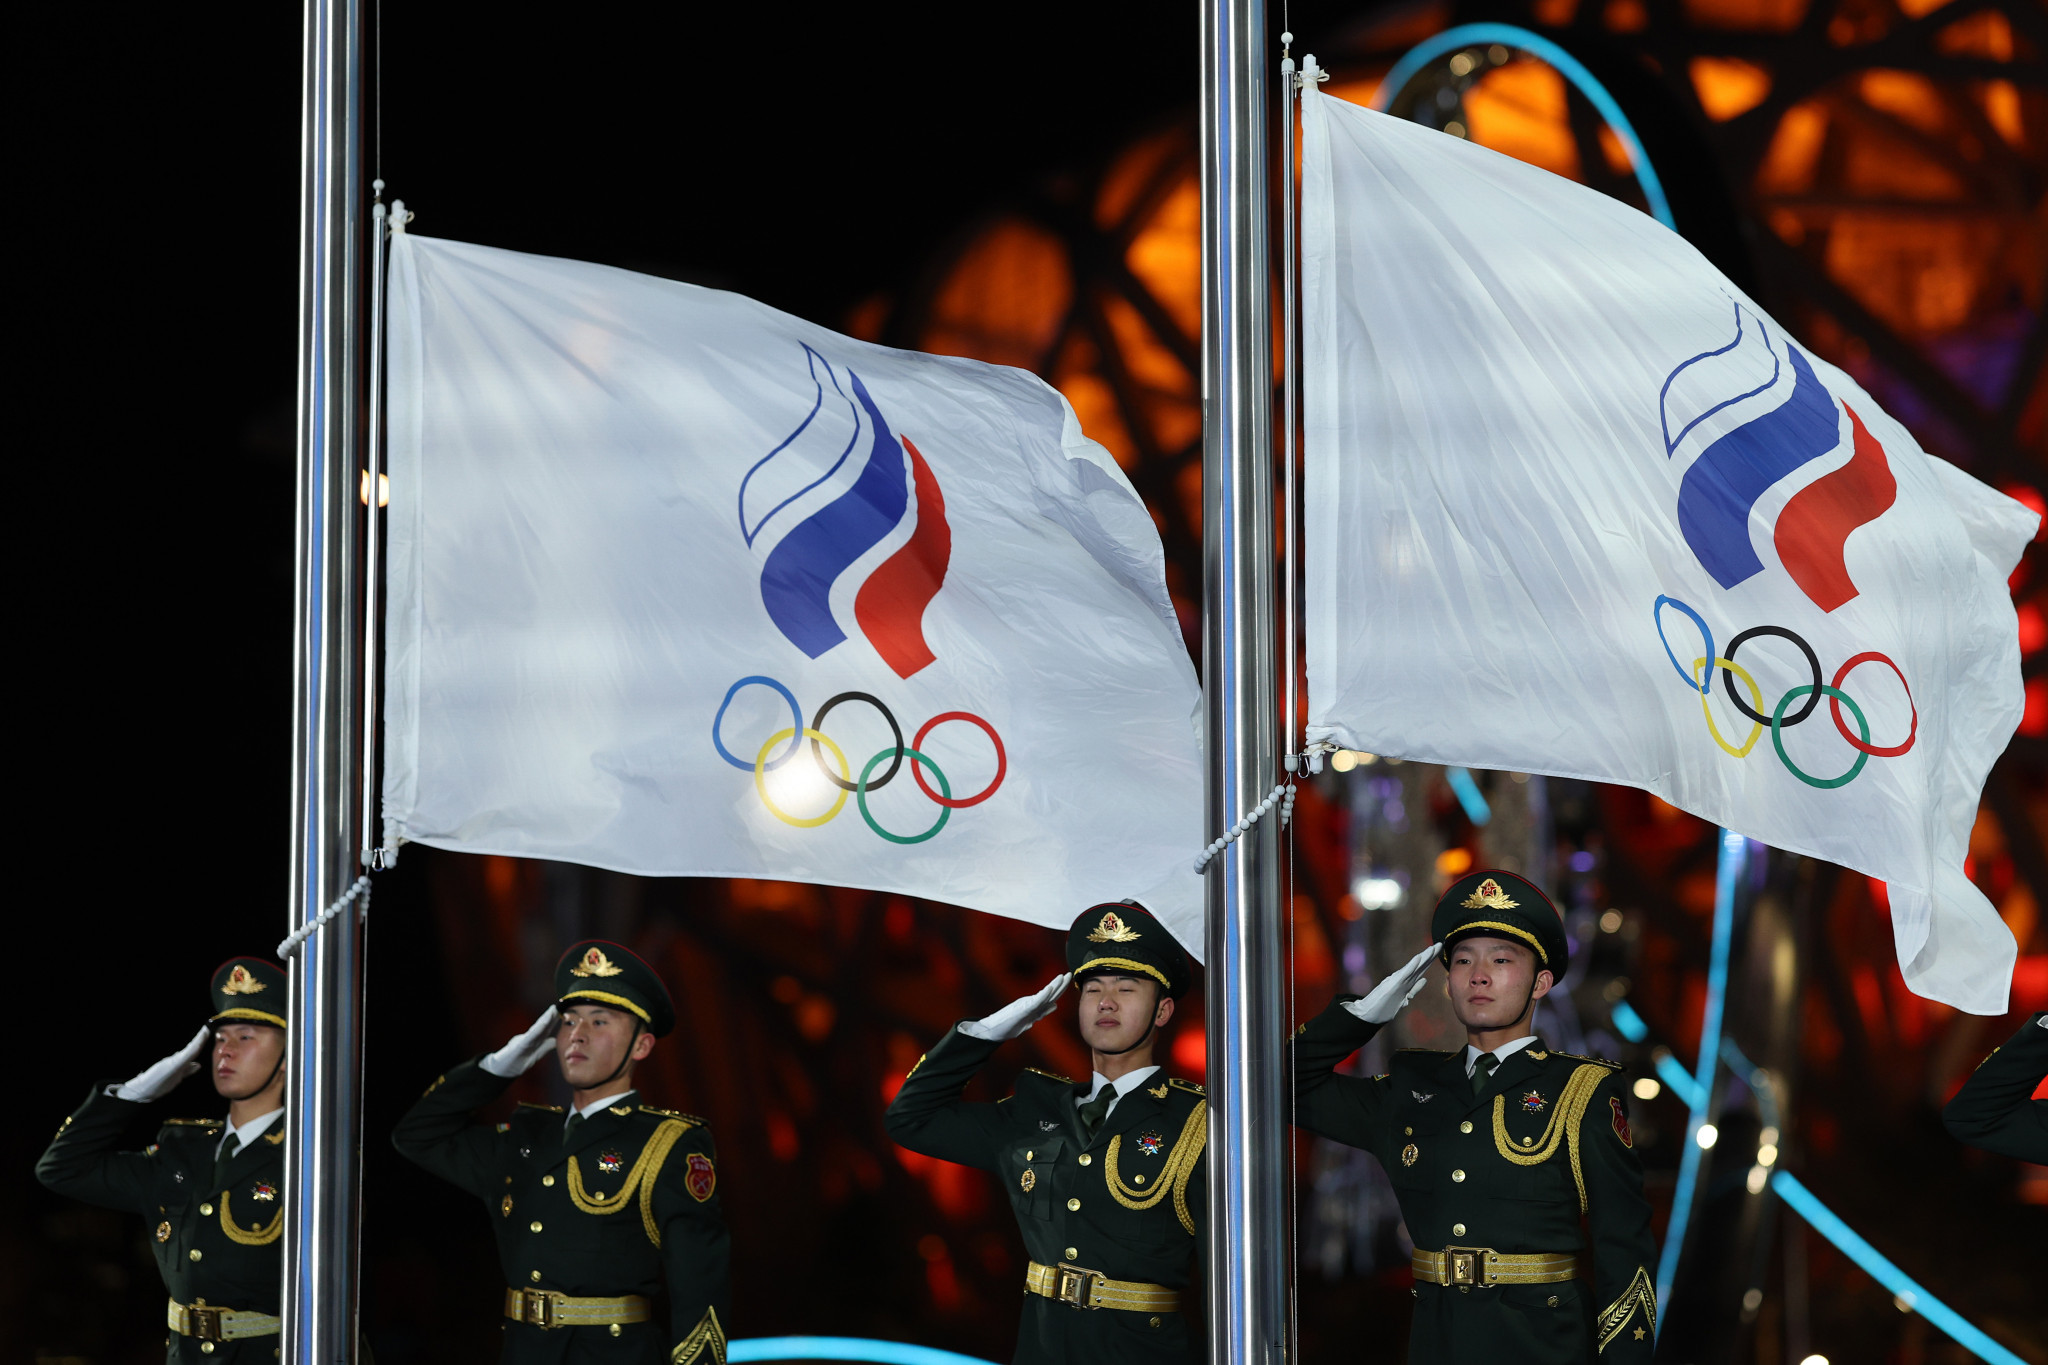 The Russian Olympic Committee flag flown in Tokyo and Beijing featured an emblem in the colours of the Russian national flag ©Getty Images